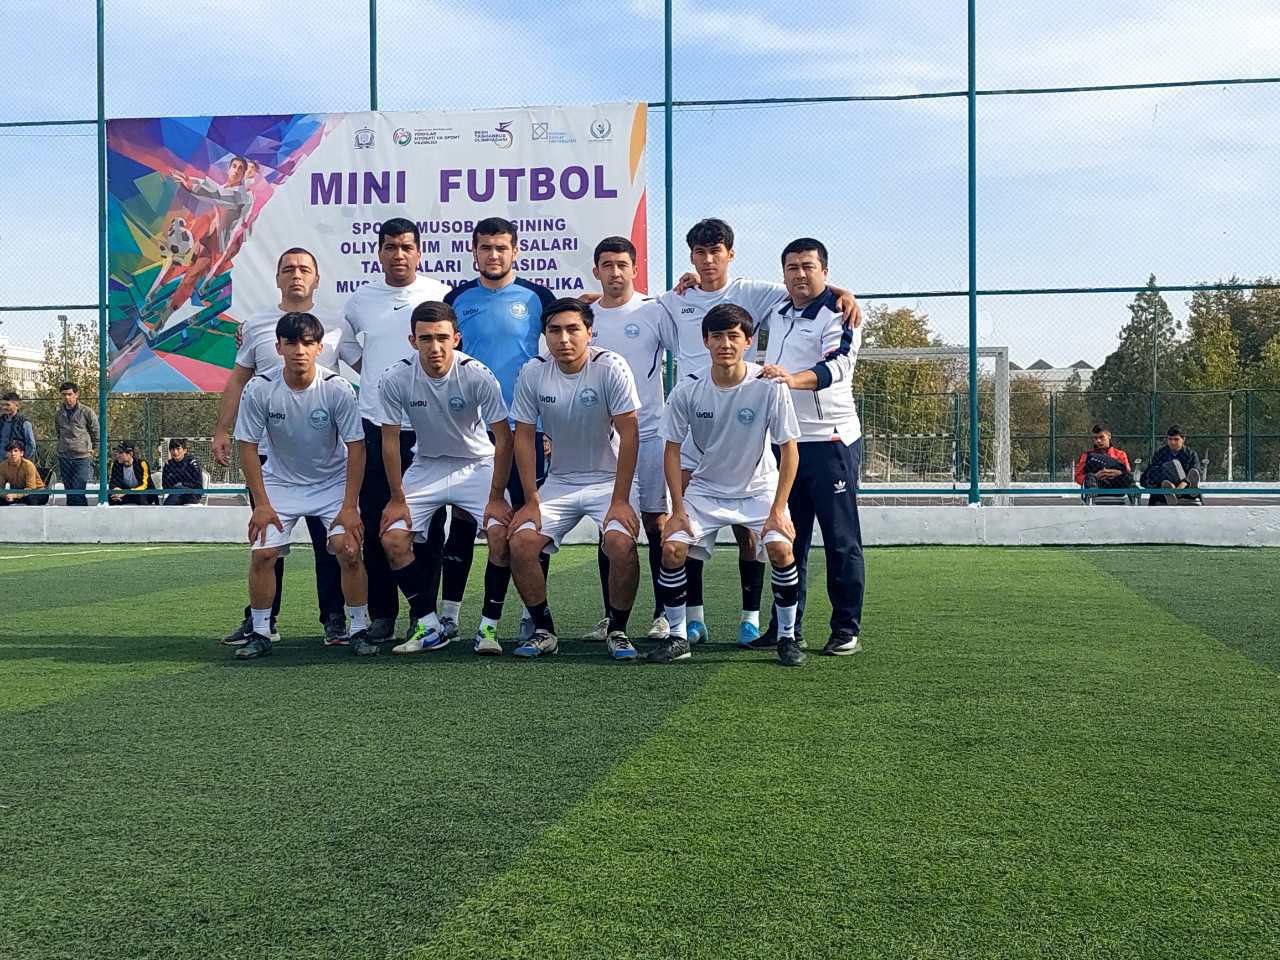 The victory was recorded: our university team won the 1st place in Mini-football